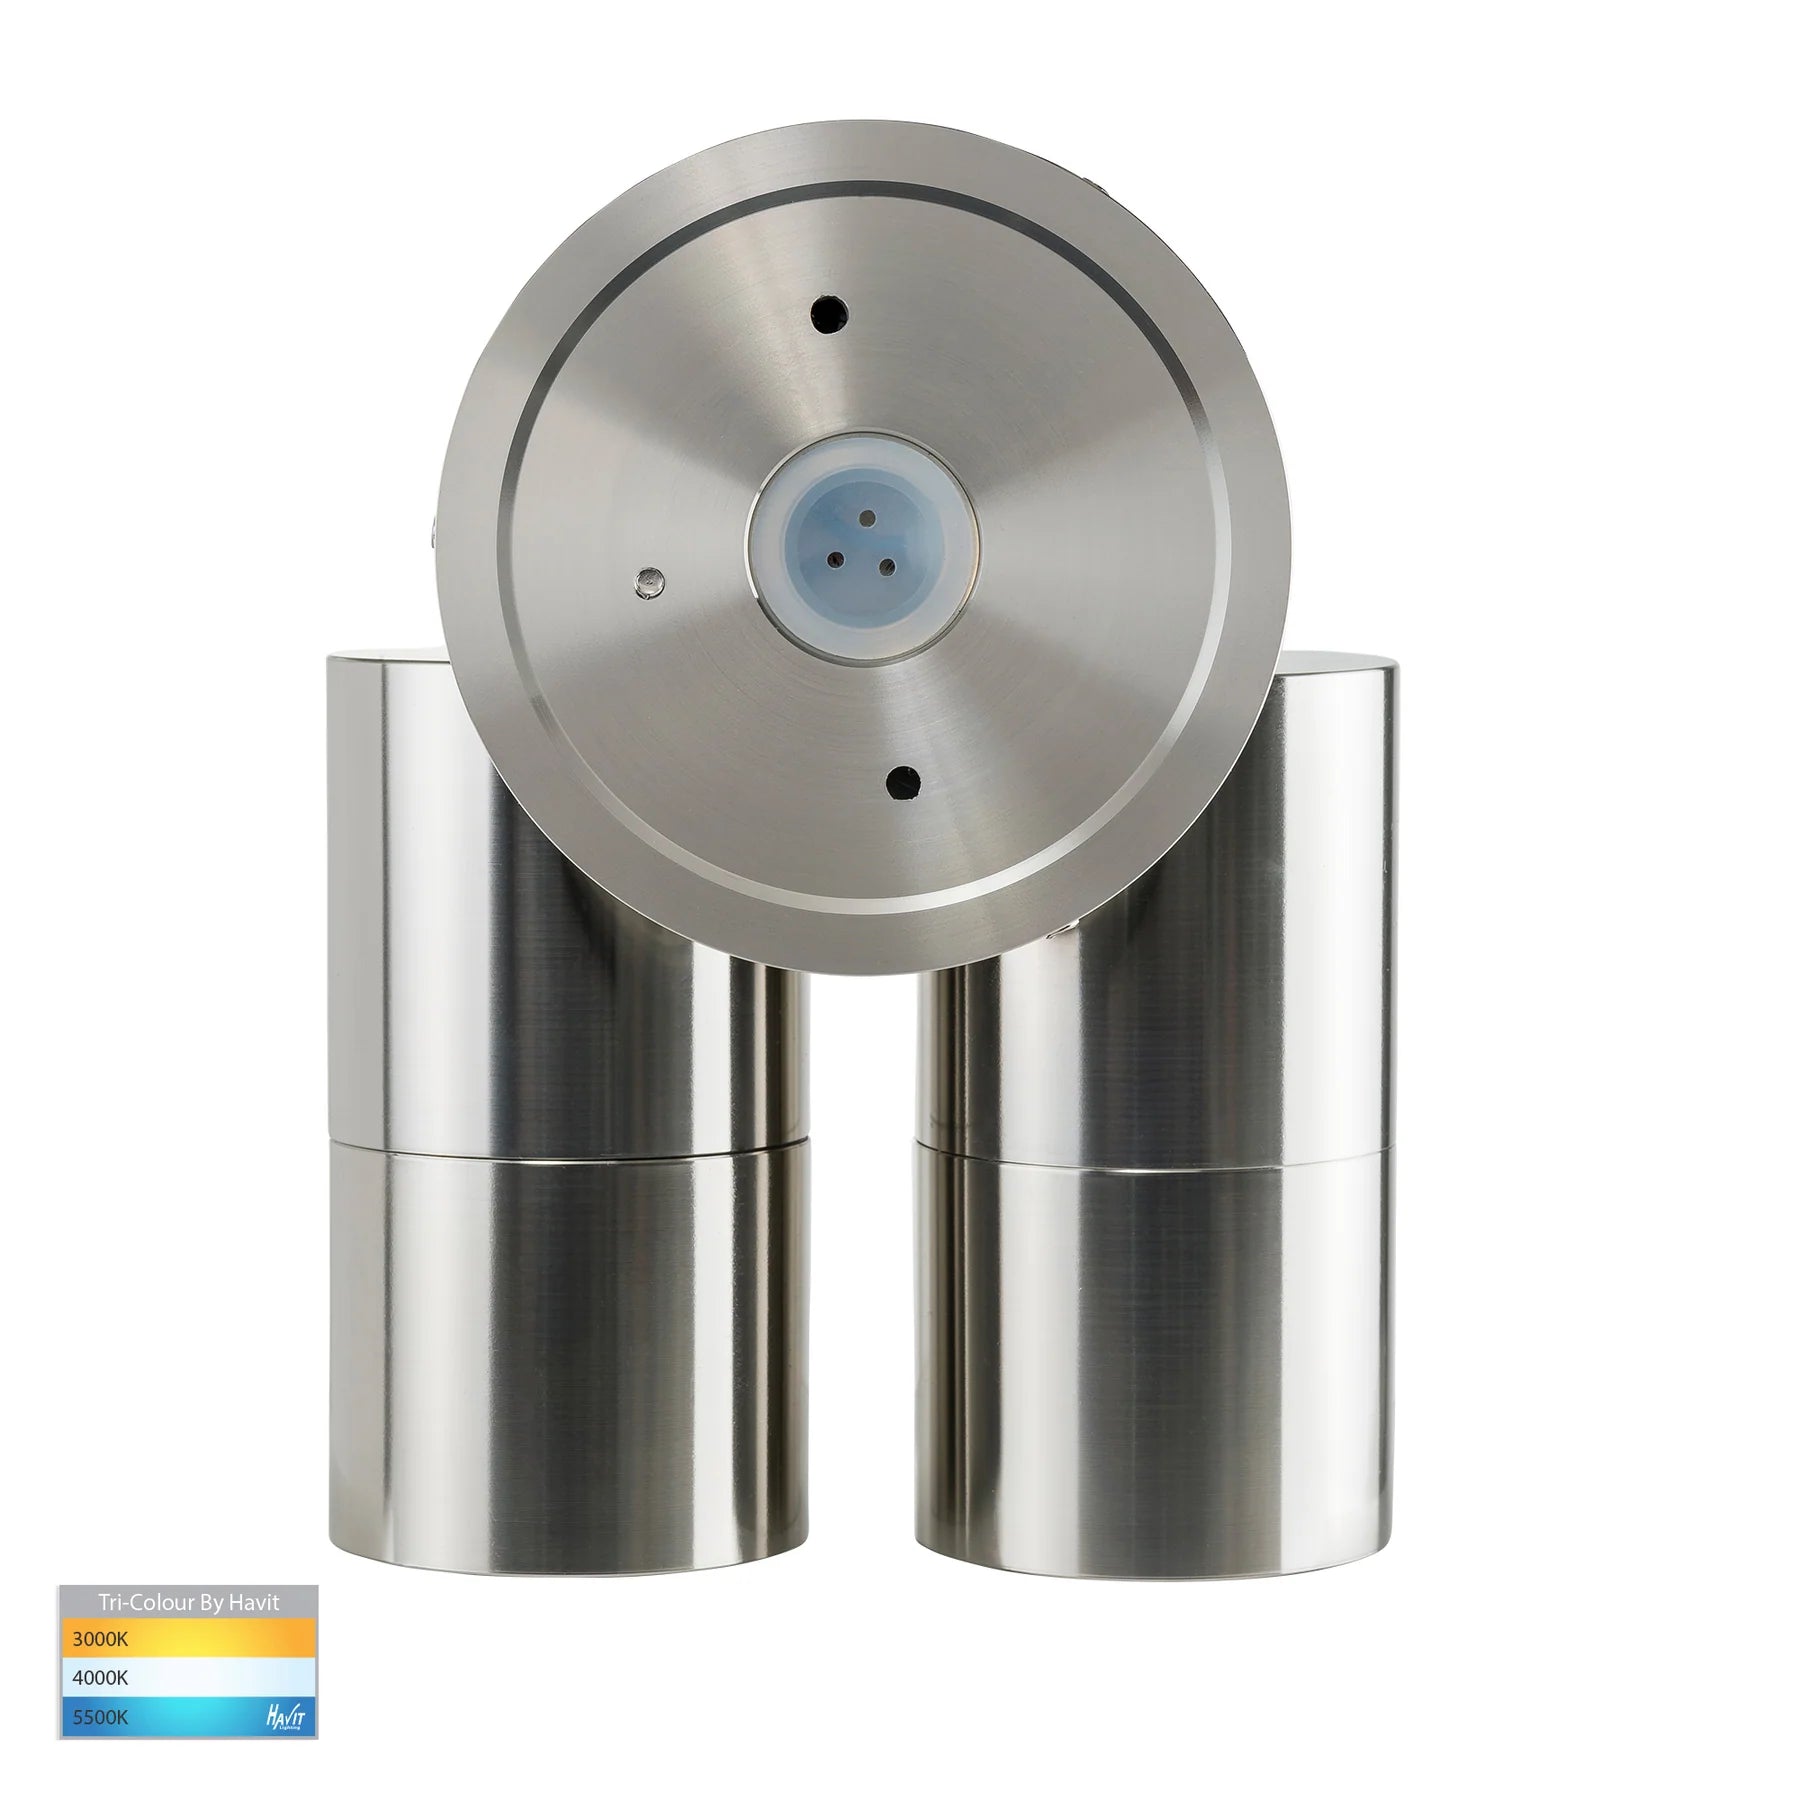 Tivah 316 Stainless Steel TRI Colour Double Adjustable Spot Lights with Sensor - HV1306T-PIR